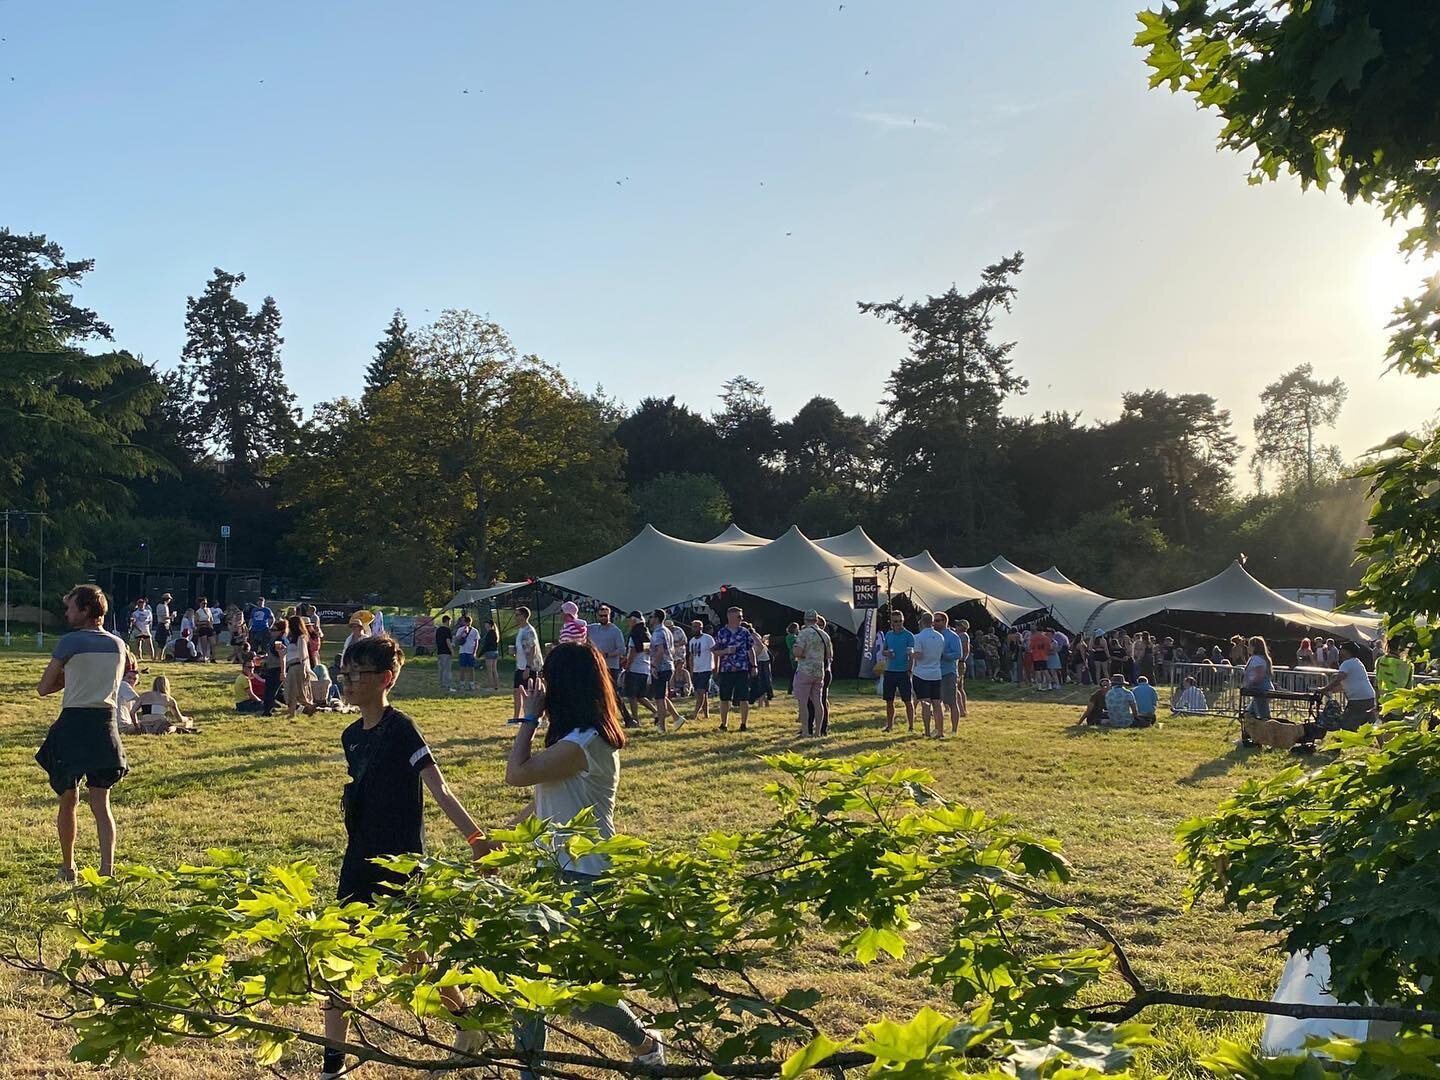 Stretch tents in the sun last weekend at @shindigfestival
.
.
.

#stretchtent #Stretchtents #RHI #marquee #temporarystructure #Eventprofs #canopy #festivaltent #eventproduction #eventsagency #stretchcanvas #stretchcanopy #events